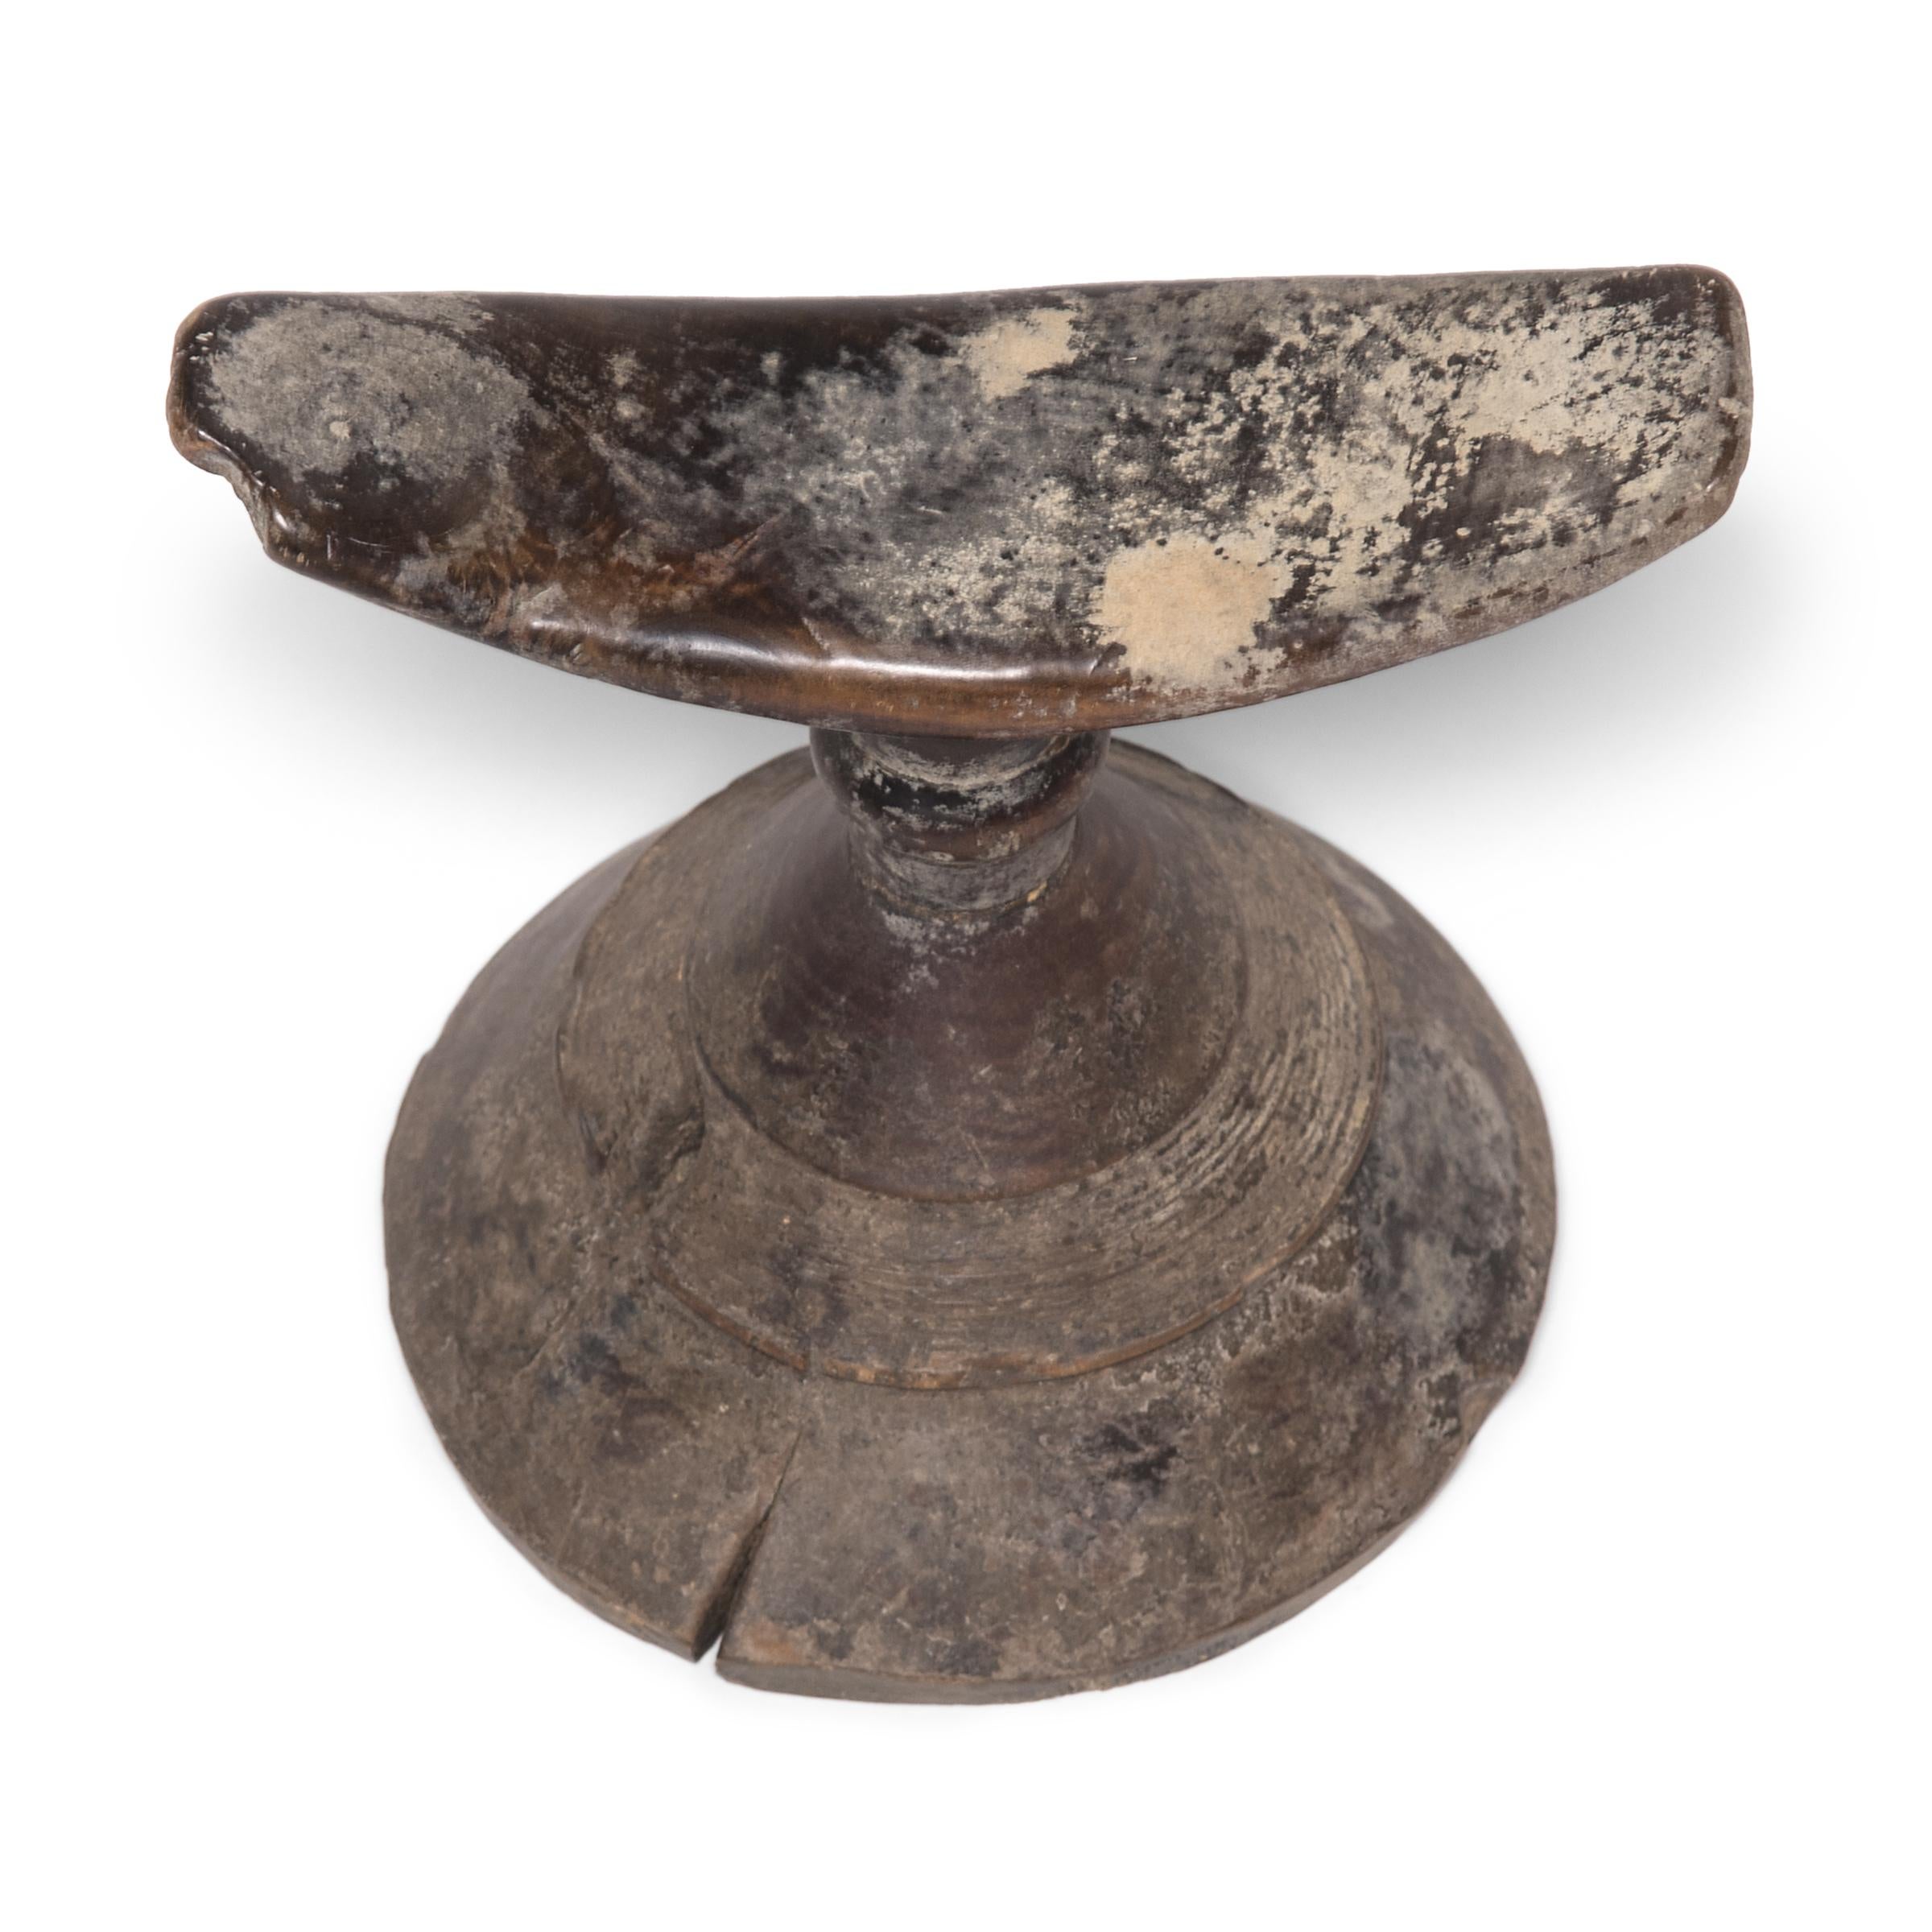 So as not to muss their intricate hairstyles, Ethiopian women would traditionally rest their heads on these petite wooden stands. The combination of conic base and concave rest gives this functional item an elevated sense of artistry. Expressively